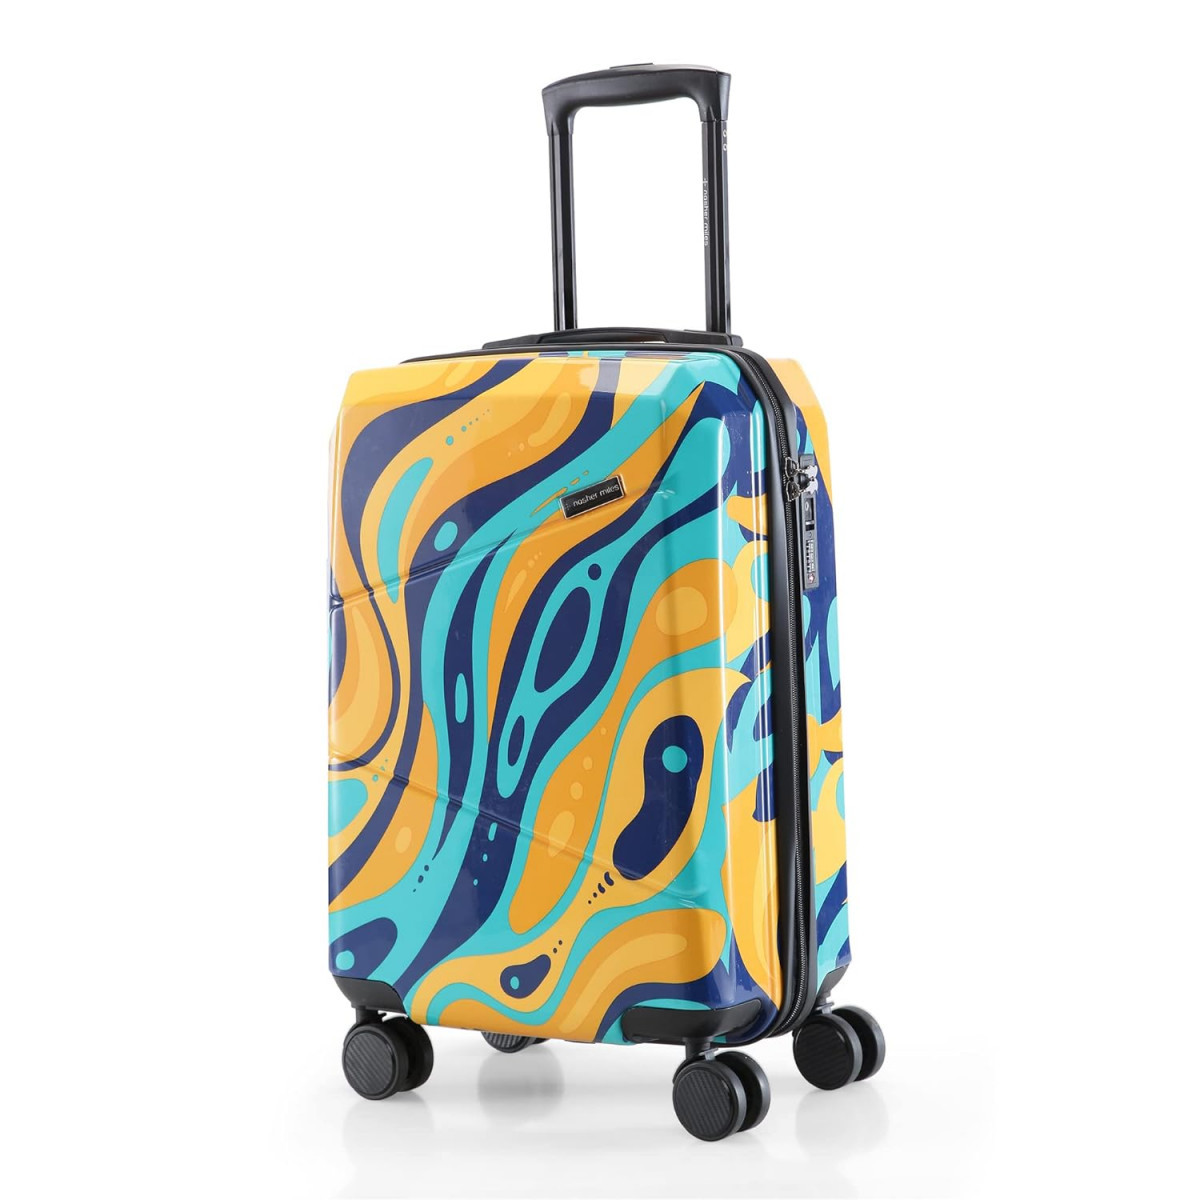 Nasher Miles Manali Hard-Sided Polycarbonate Printed Luggage Bag Printed Luggage Bag Cabin Pink Multicolor 20 inch 55cm Trolley Bag